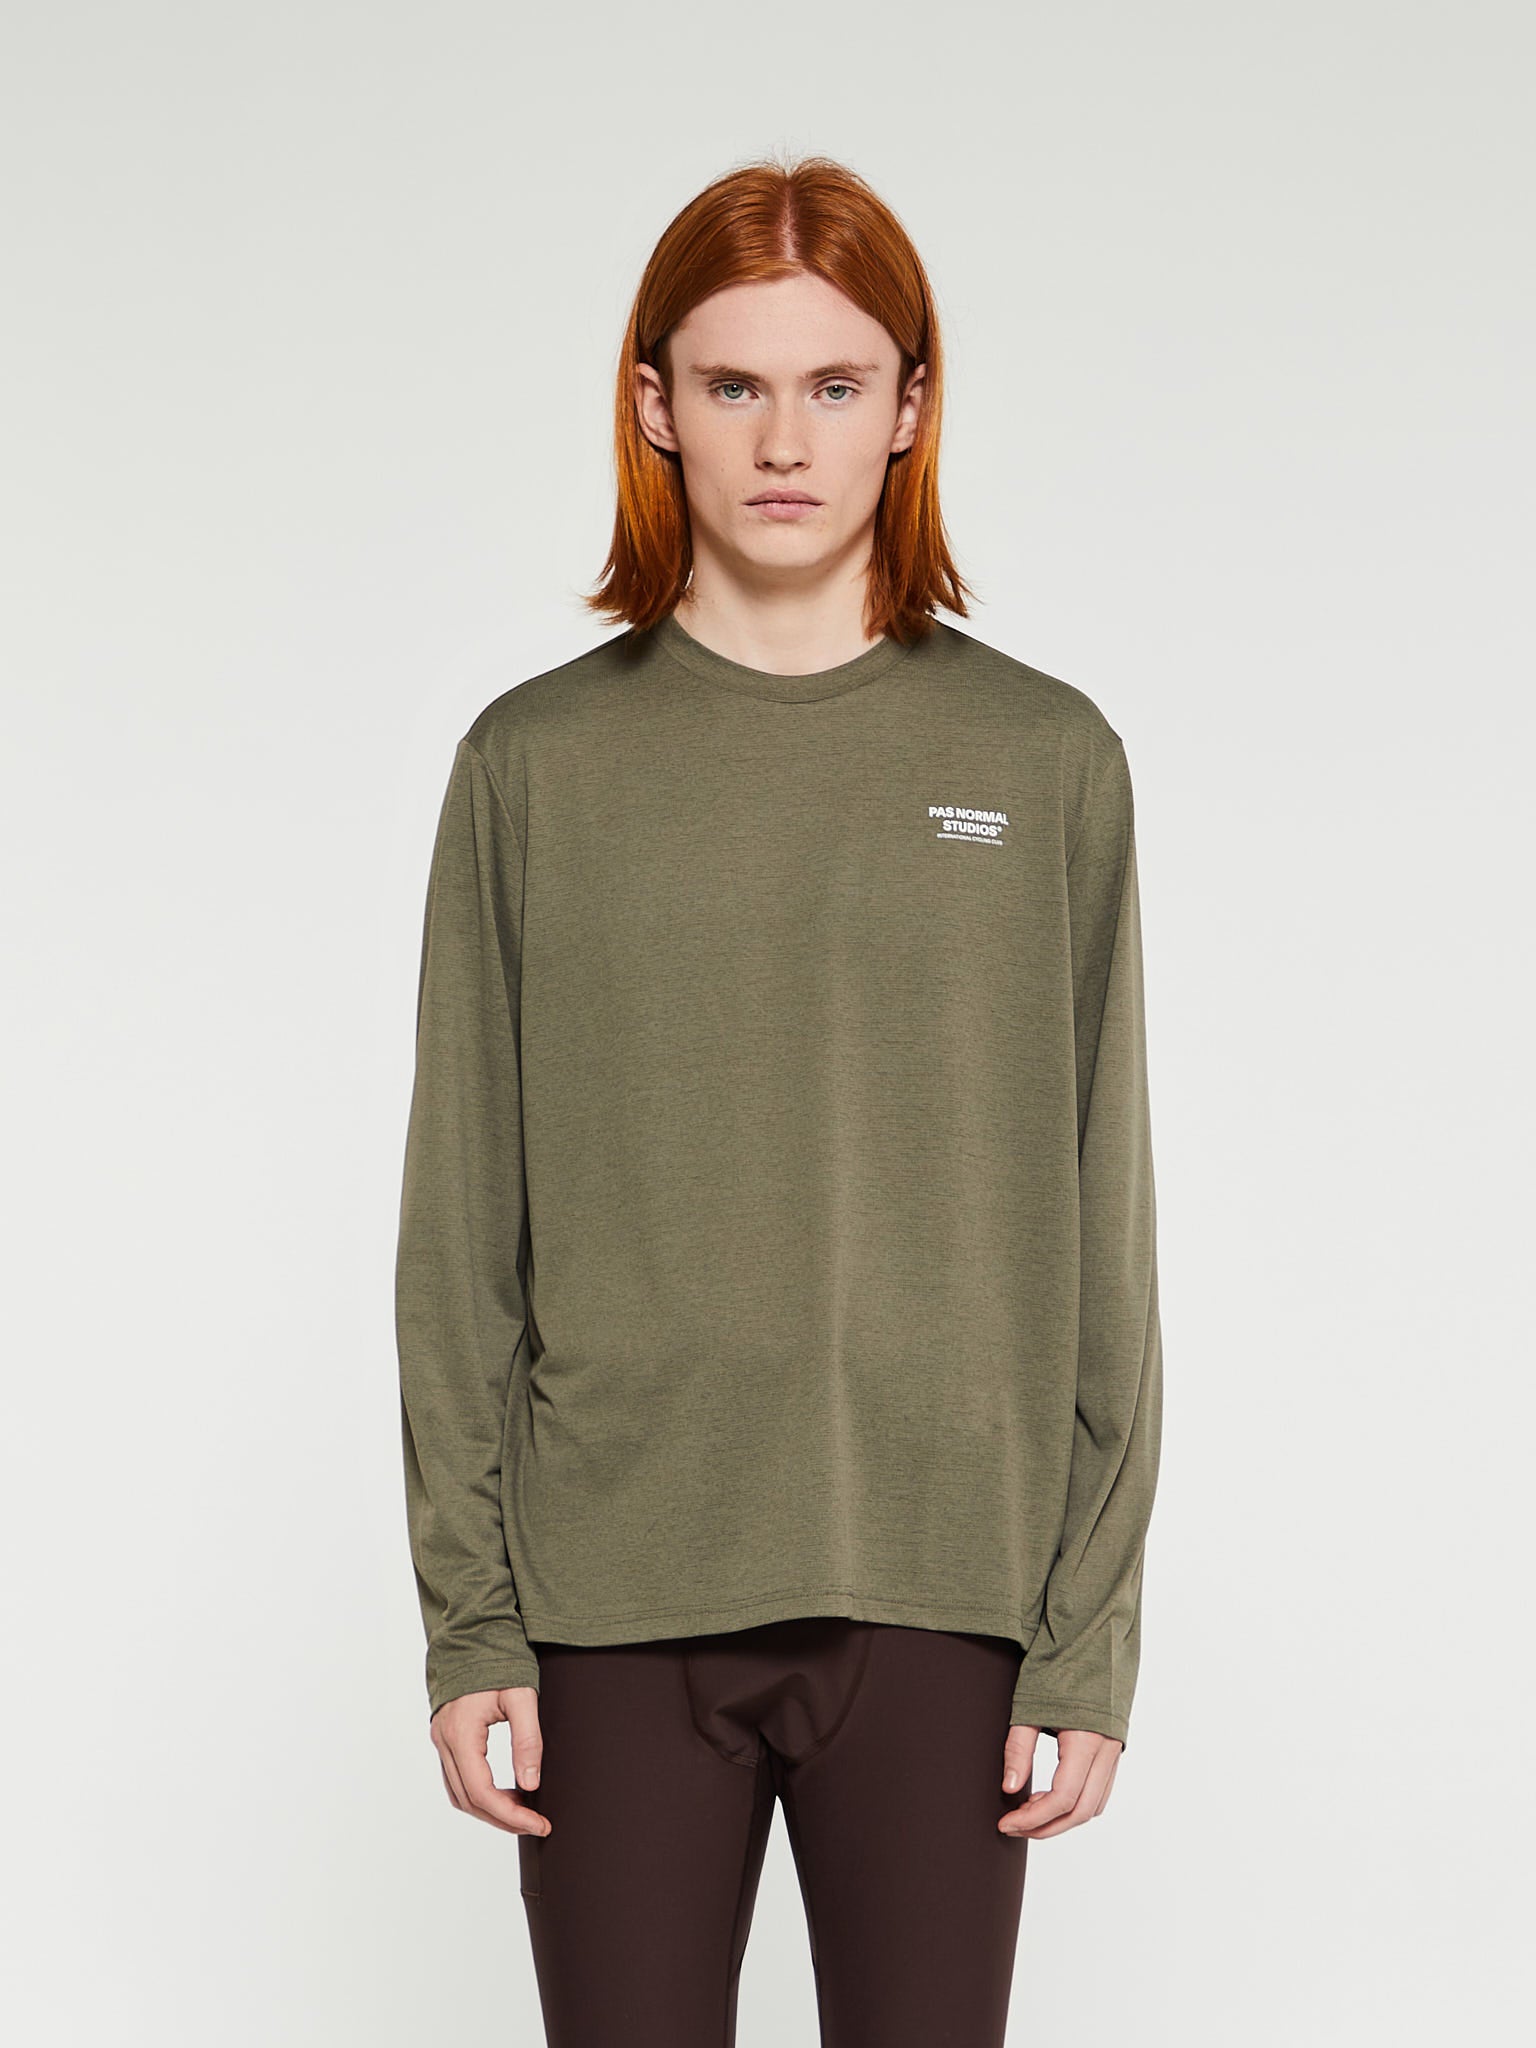 Pas Normal Studios - Balance Longsleeved T-Shirt in Olive Grey